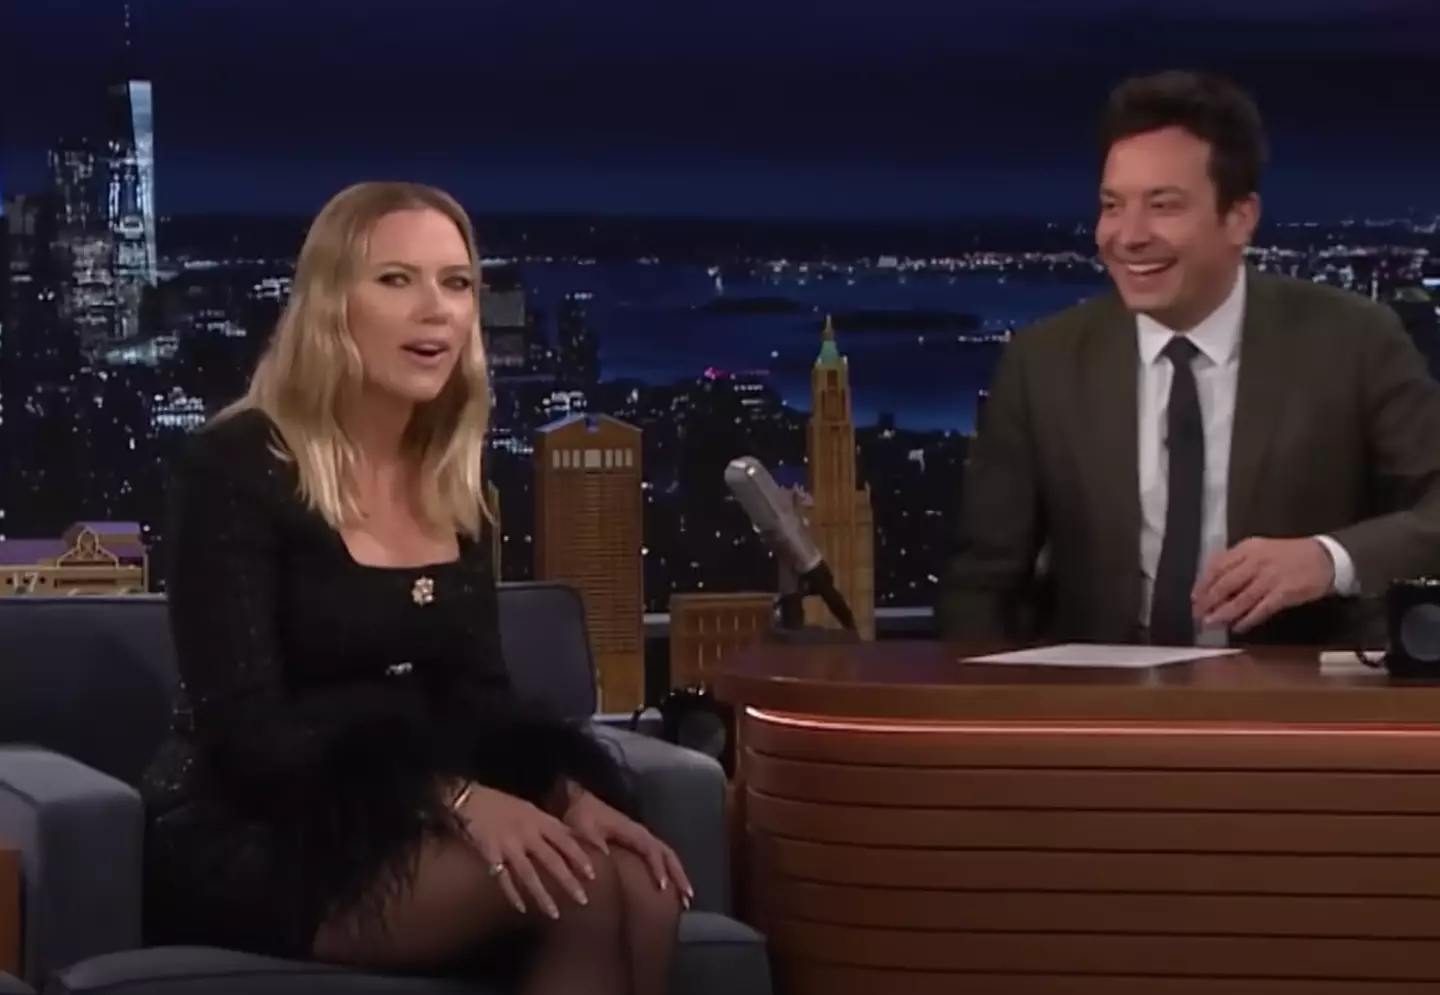 Johansson has finally addressed the clip while speaking to Jimmy Fallon.